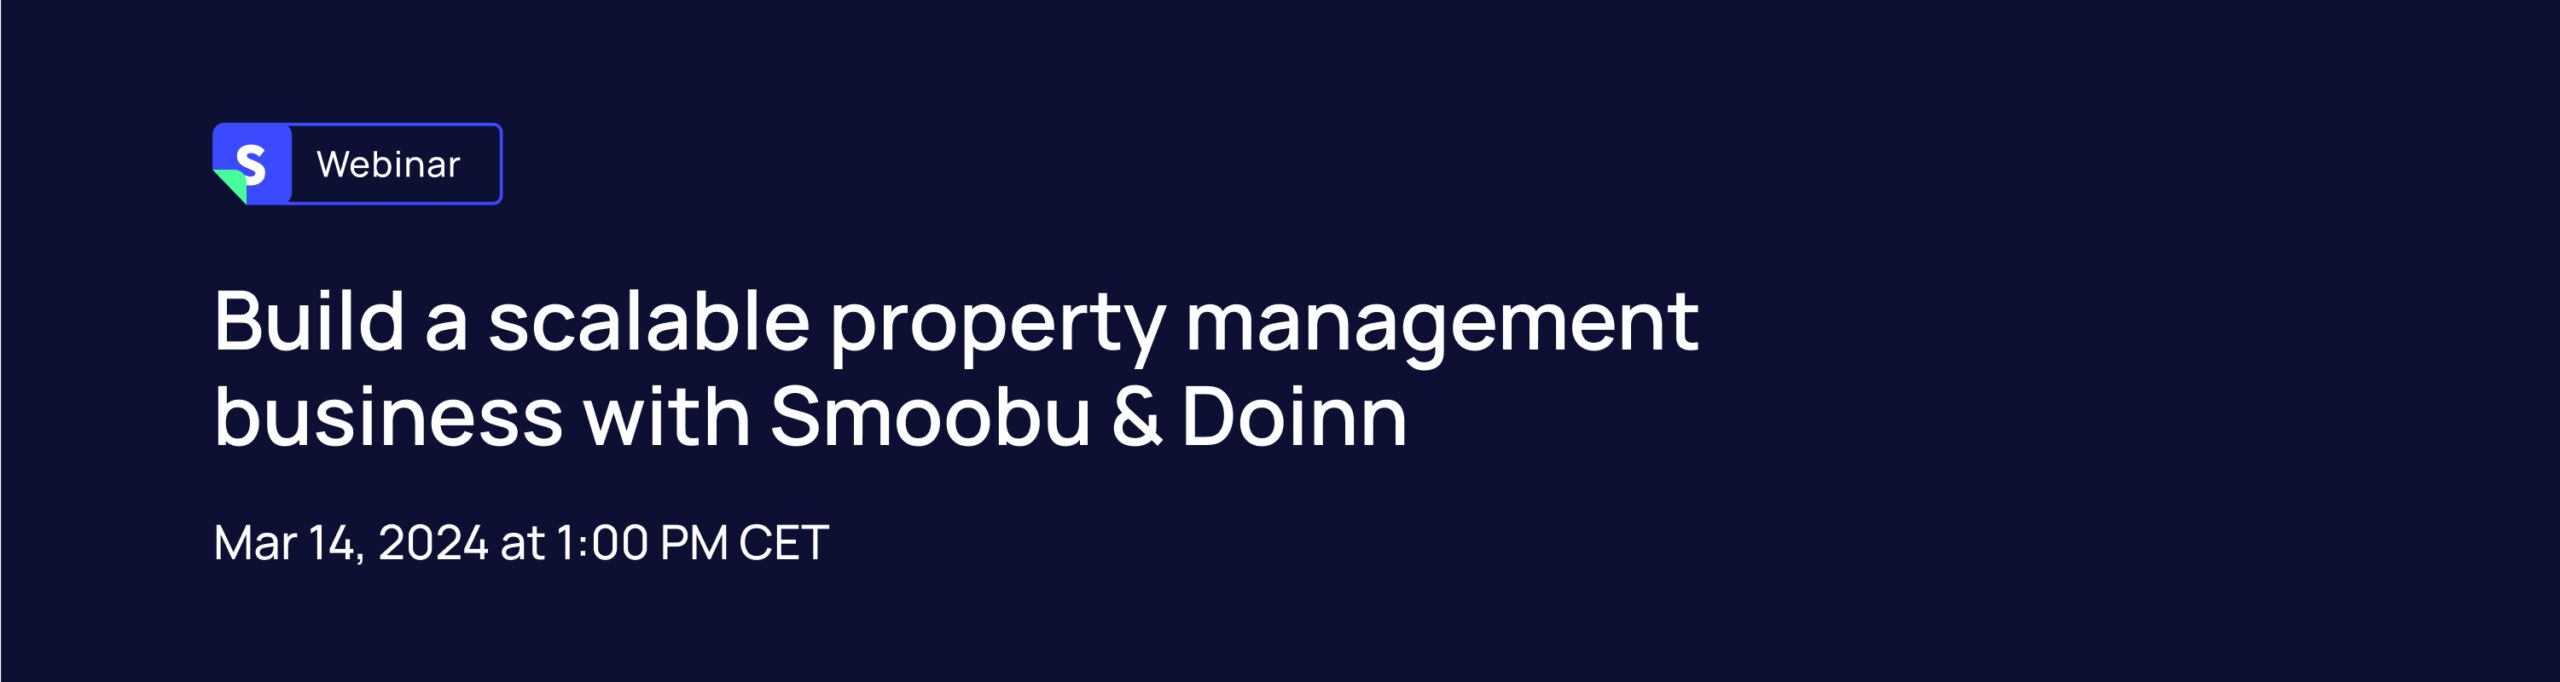 ᐅ Build a scalable property management business with Smoobu & Doinn